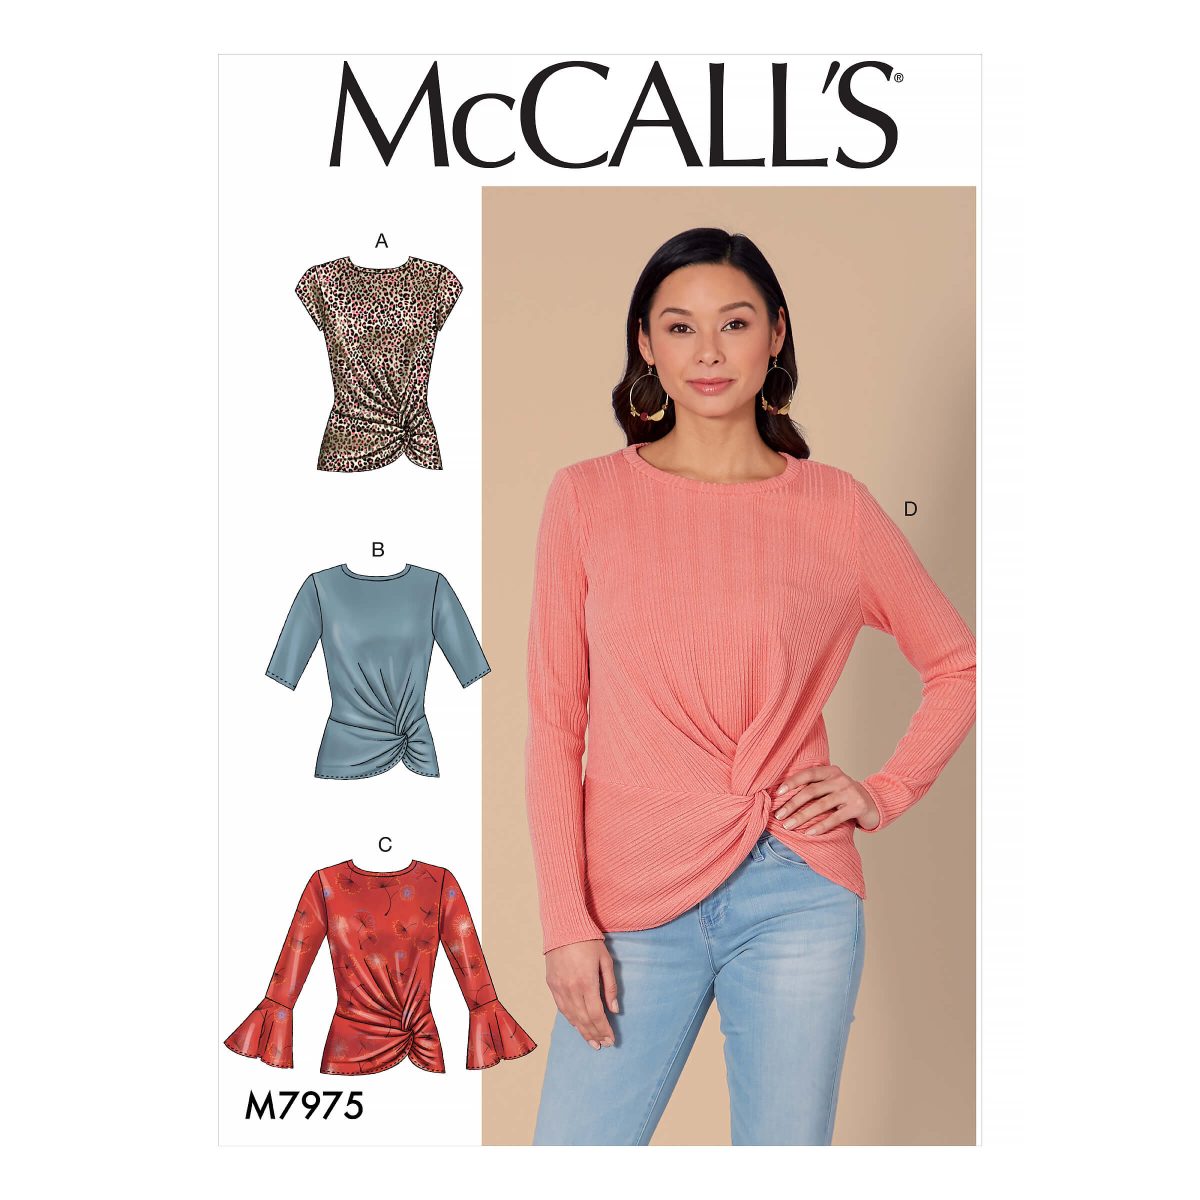 McCall's Sewing Pattern M7975 Misses' Tops